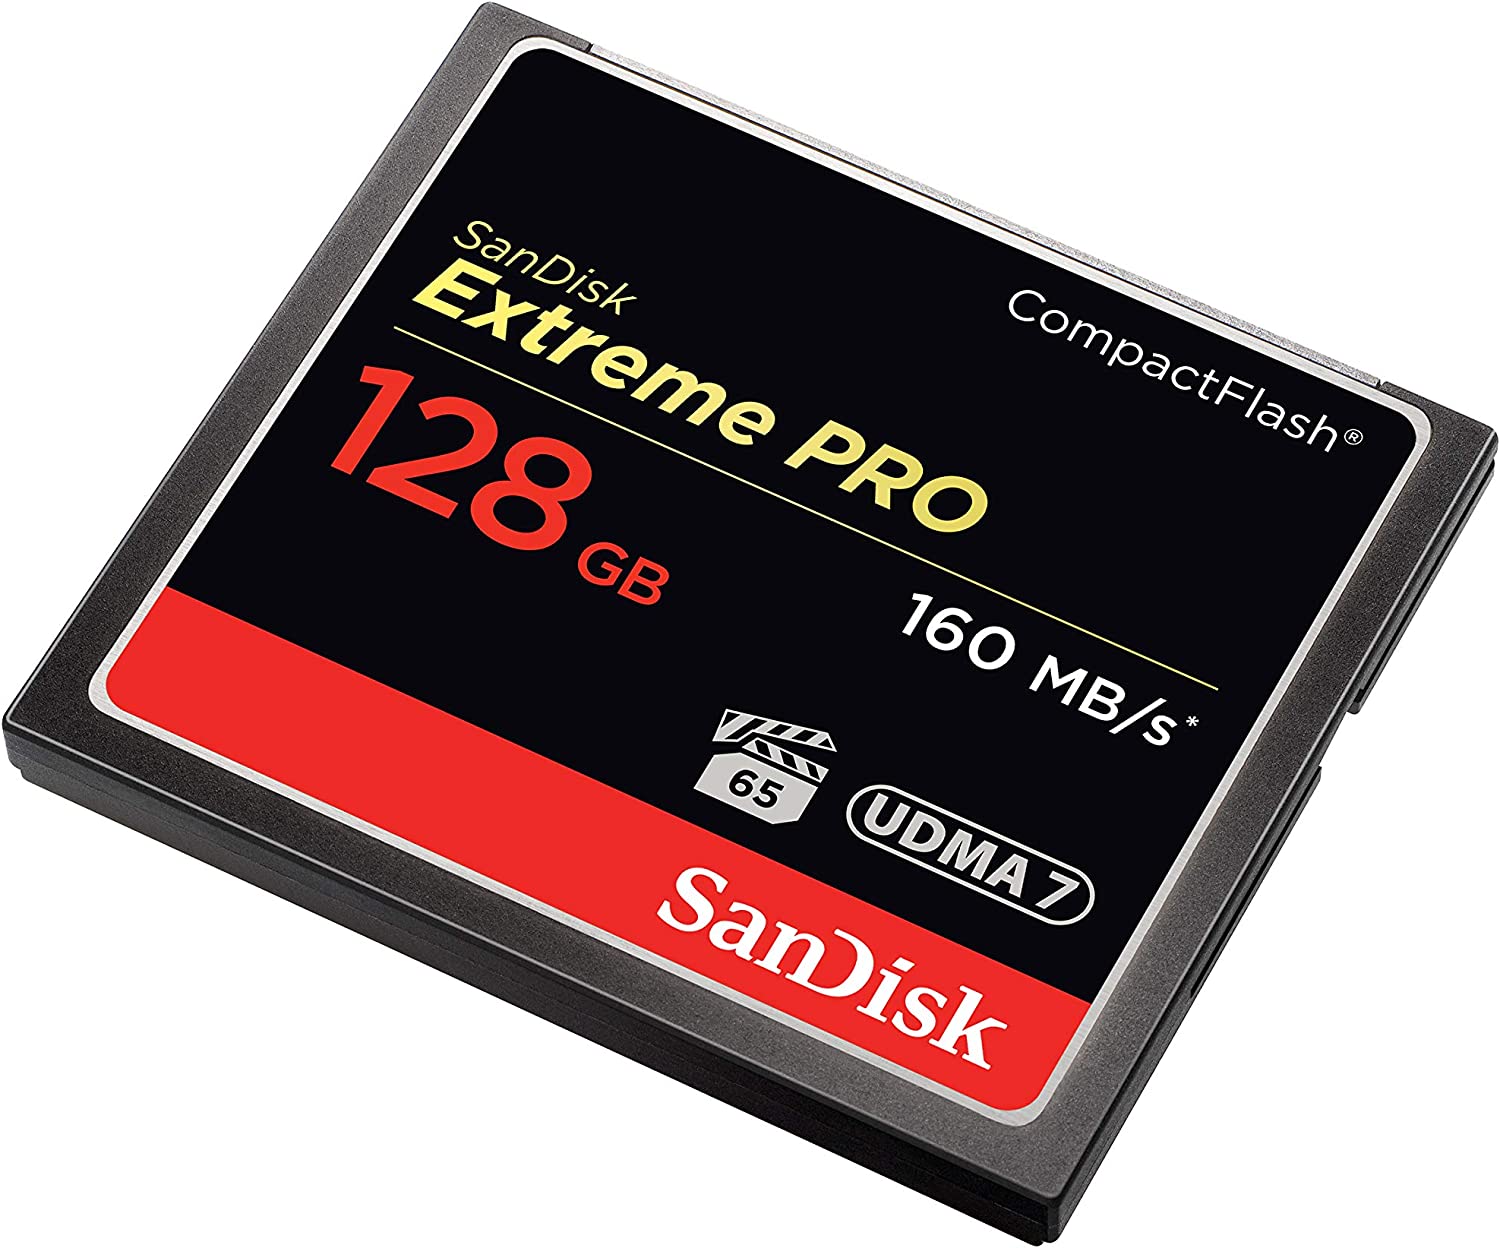 A CompactFlash card, it looks similar to an SD card used in cameras but larger and without the cut off corner